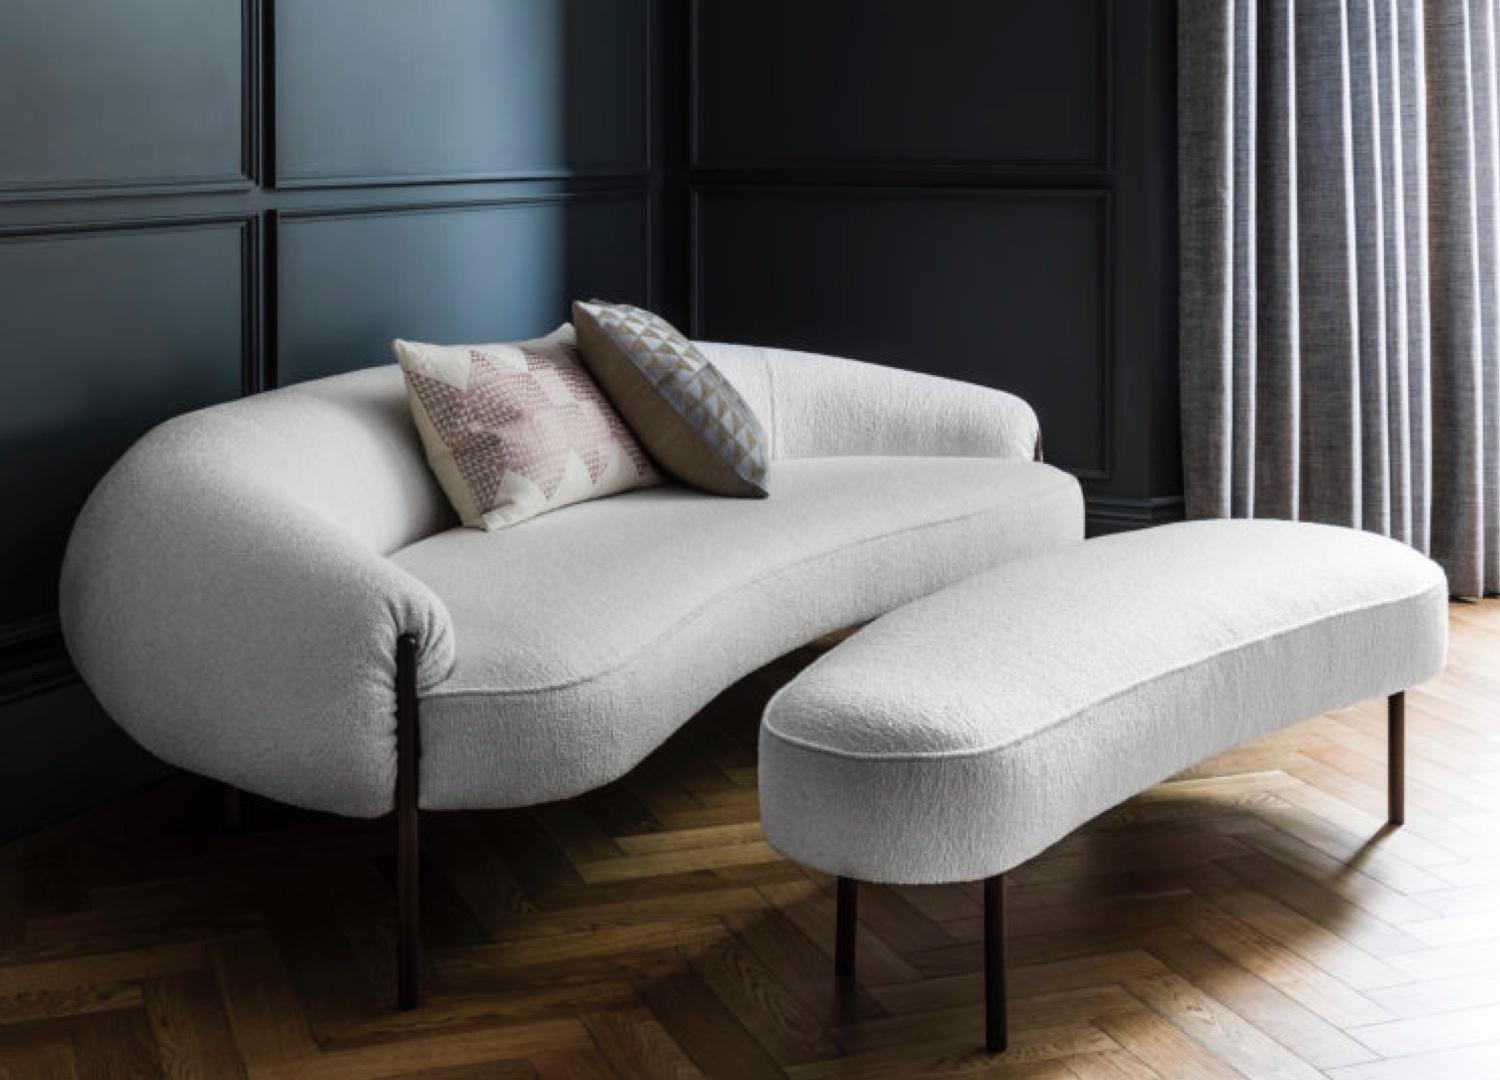 Contemporary Set of Seating 'Isola' by Amura Lab 
Designer: Lucy Kurrein

Model shown: Textile - Ortisei 01

Dimensions : 
- Sofa : H. 67 x W. 220 x D. 99 cm 

“Isola: icon of the future” Isola is a statement of intent, a design collection